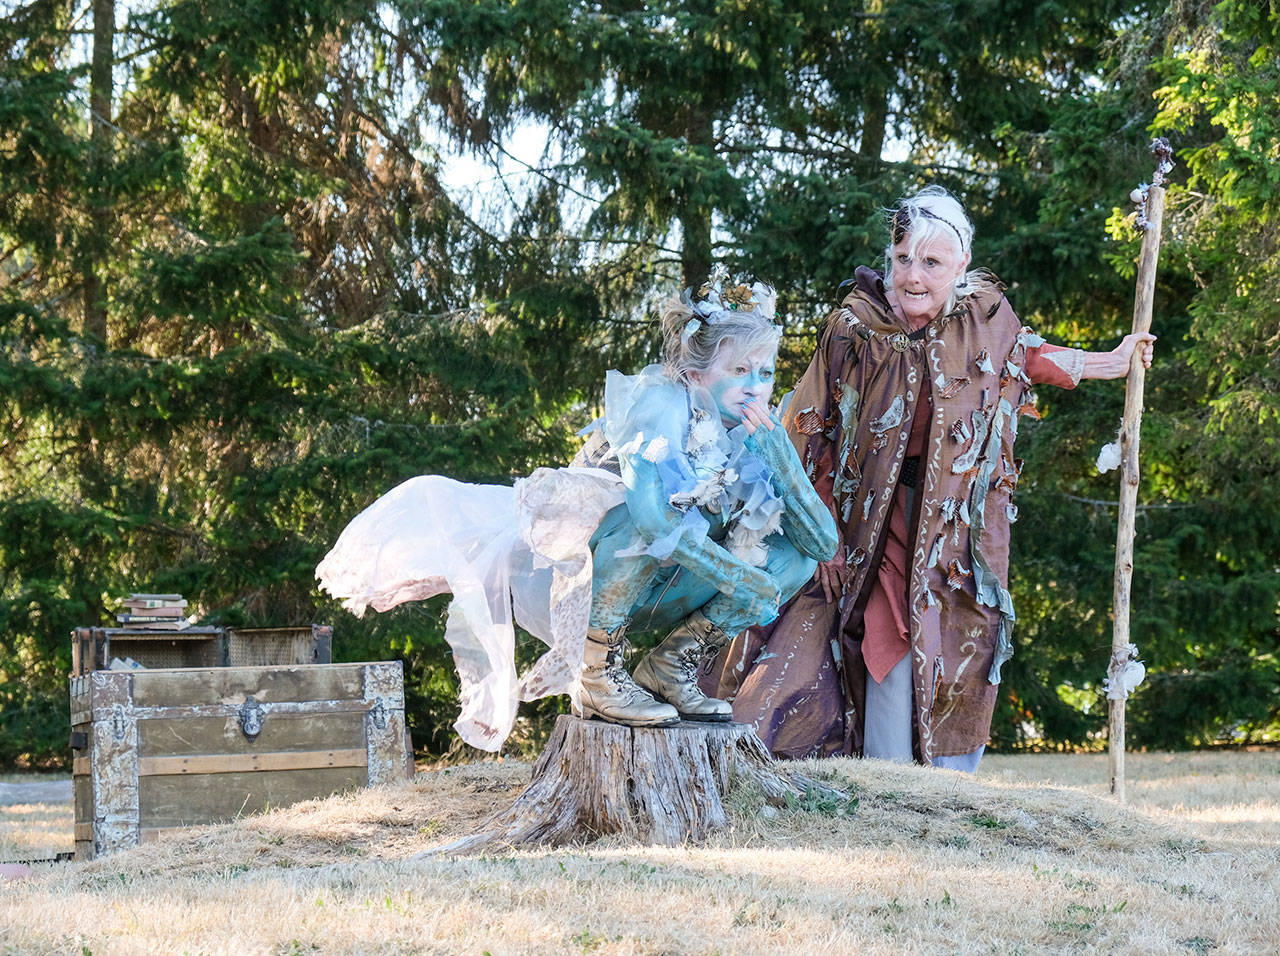 Mik Kuhlman, as Ariel, and Jeanne Dougherty, as Propero, tear up the stage in Vashon Theatre Fest’s production of “The Tempest” (Michelle Bates Photo).